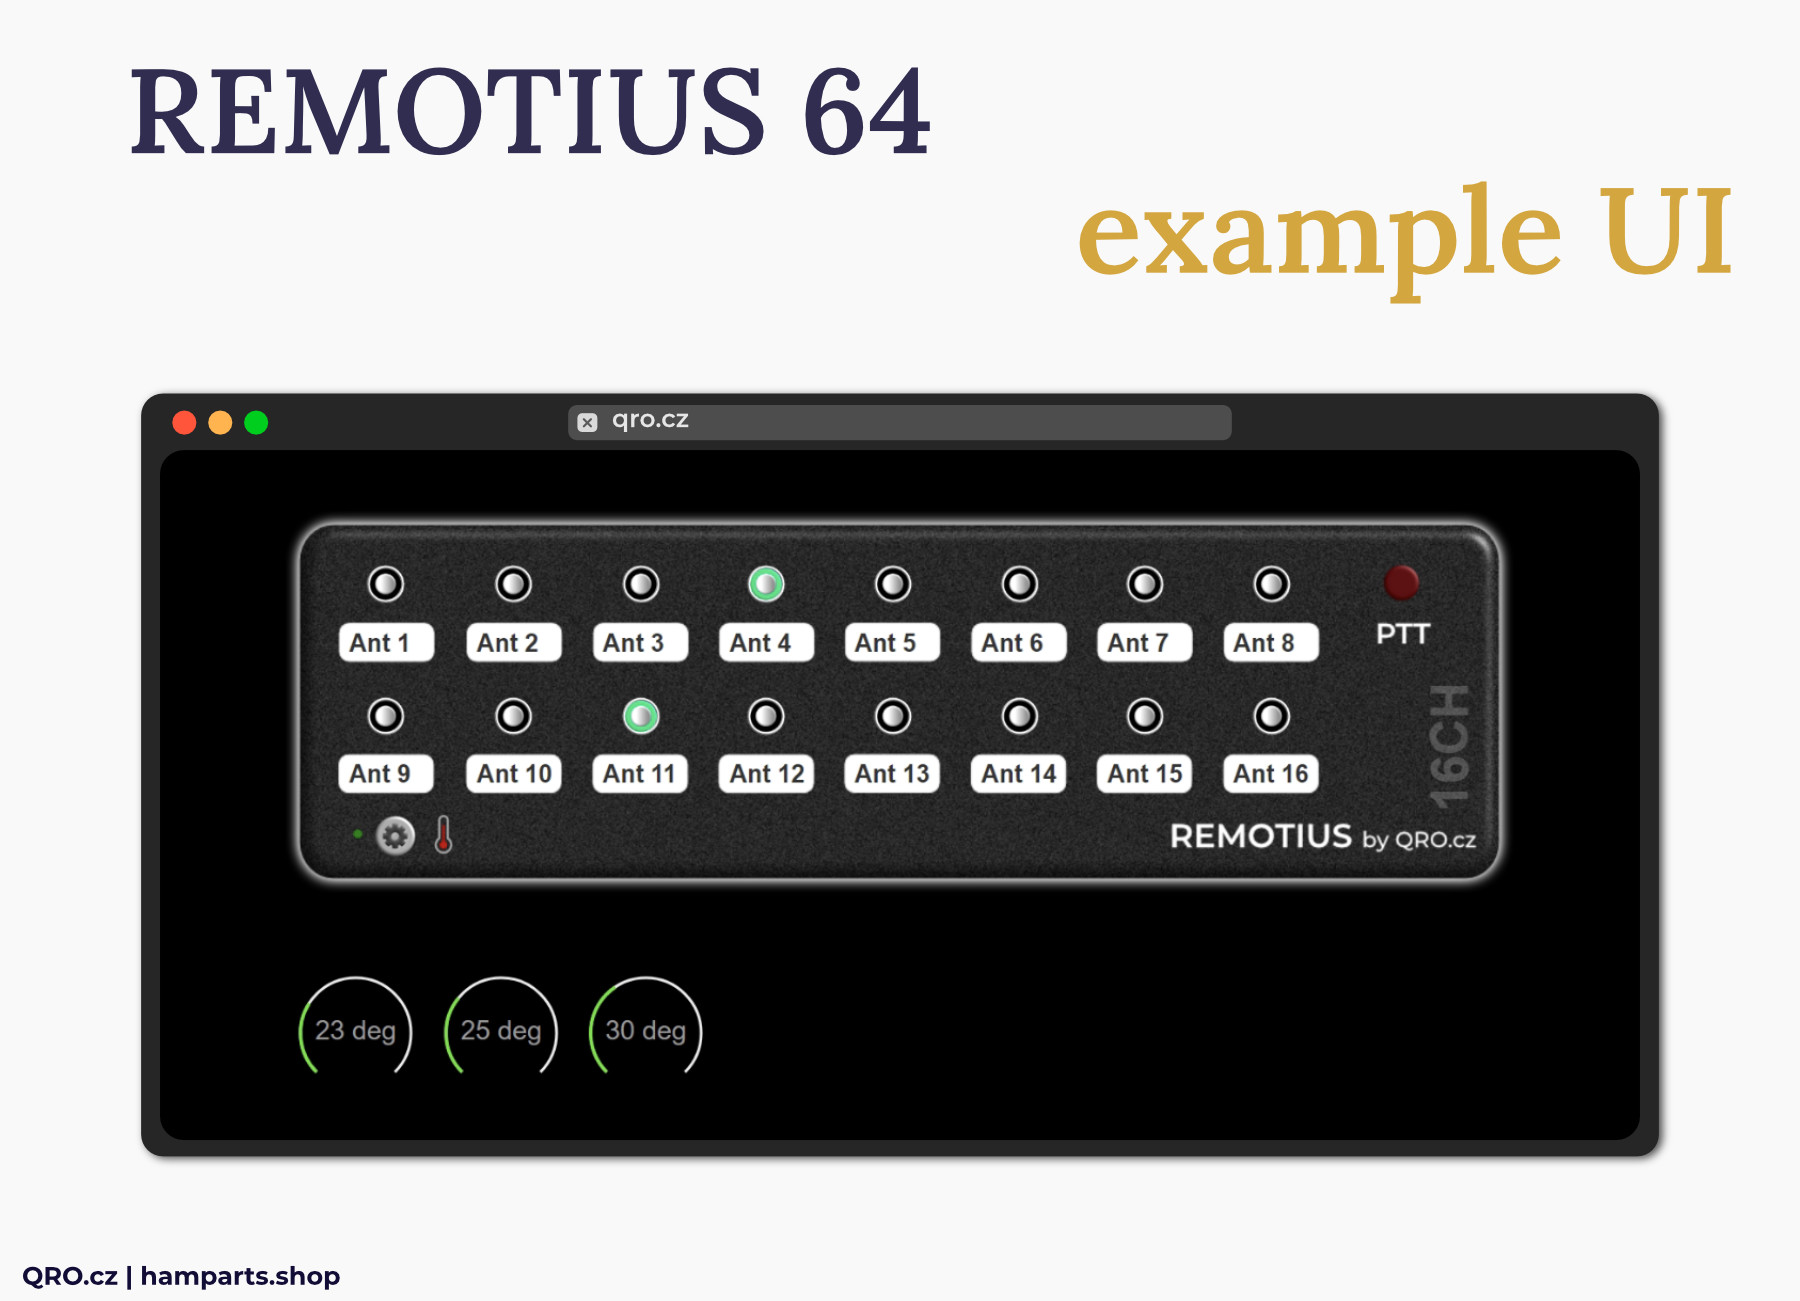 remote control example with remotius 64 remote controller by  qro.cz hamparts.shop